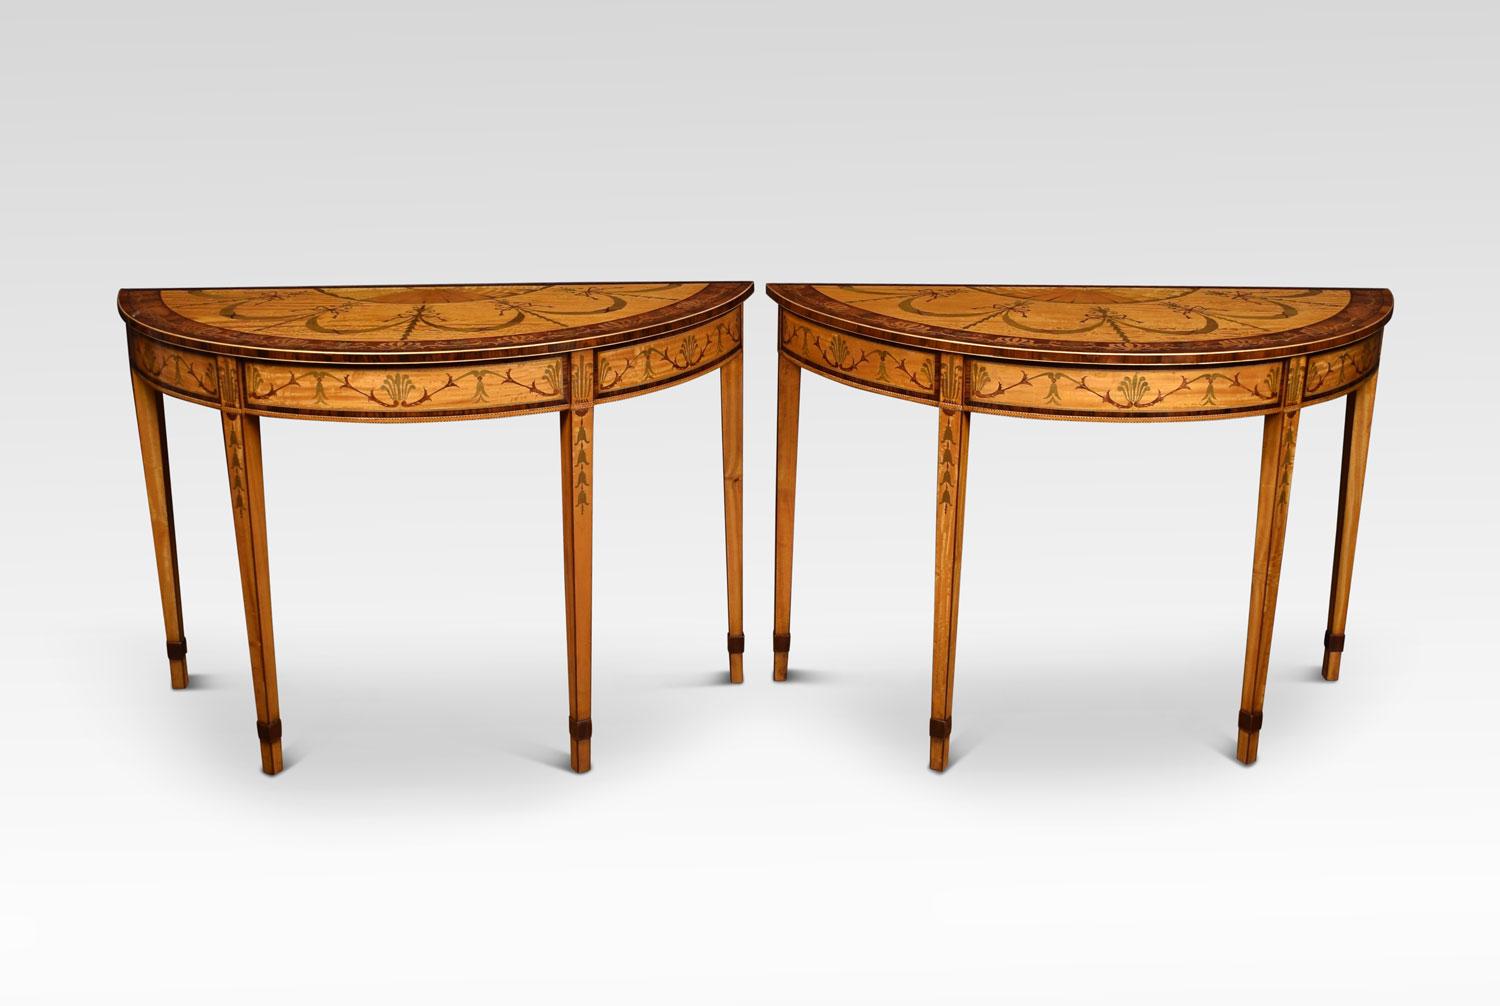 Pair of satinwood inlaid neoclassical style demilune console tables, the half moon shaped tops having floral marquetry inlay with ribbon and swag and fan detail. To the frieze again with ribbon and swag inlaid panels. Supported on square tapering